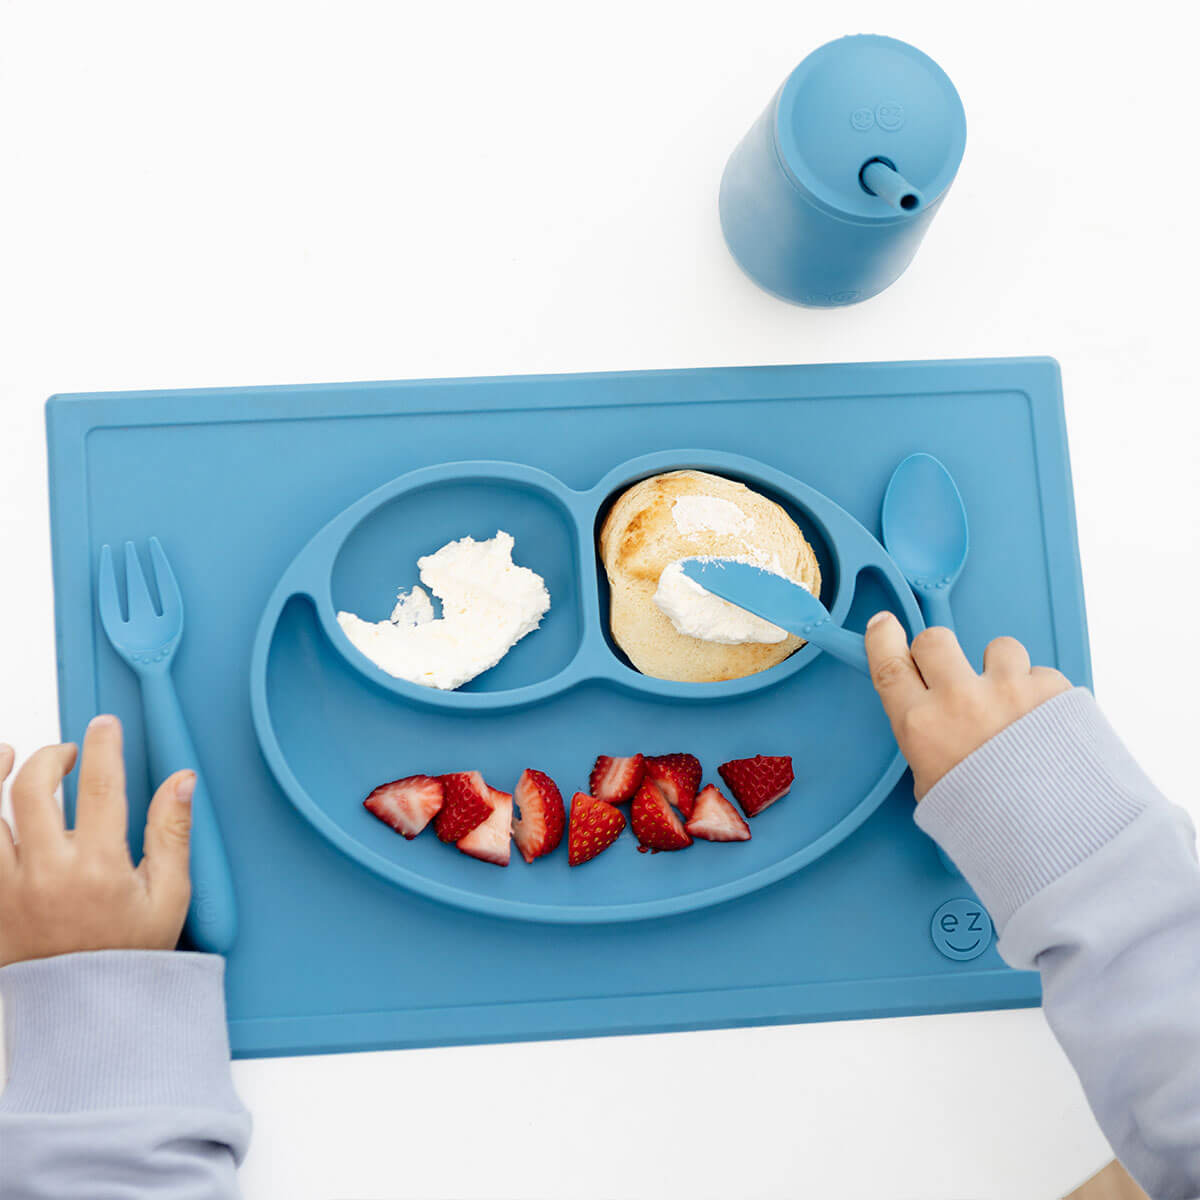 Happy Utensils in Blue by ezpz / Silicone Spoon, Fork and Knife Set for Kids